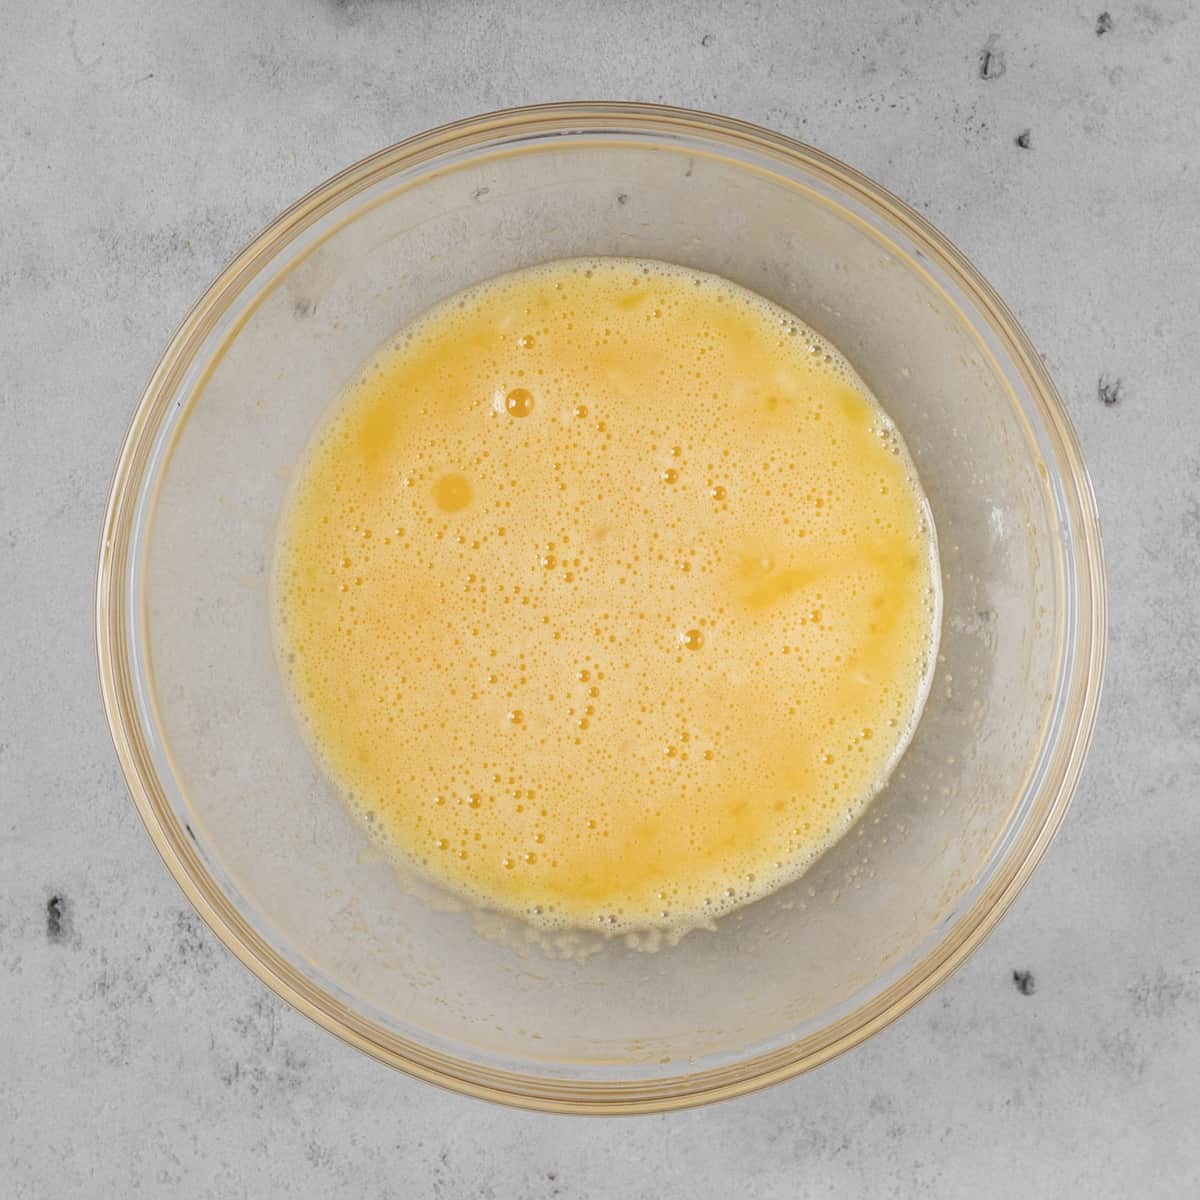 the eggs and sugar combined in a glass bowl on a grey background.